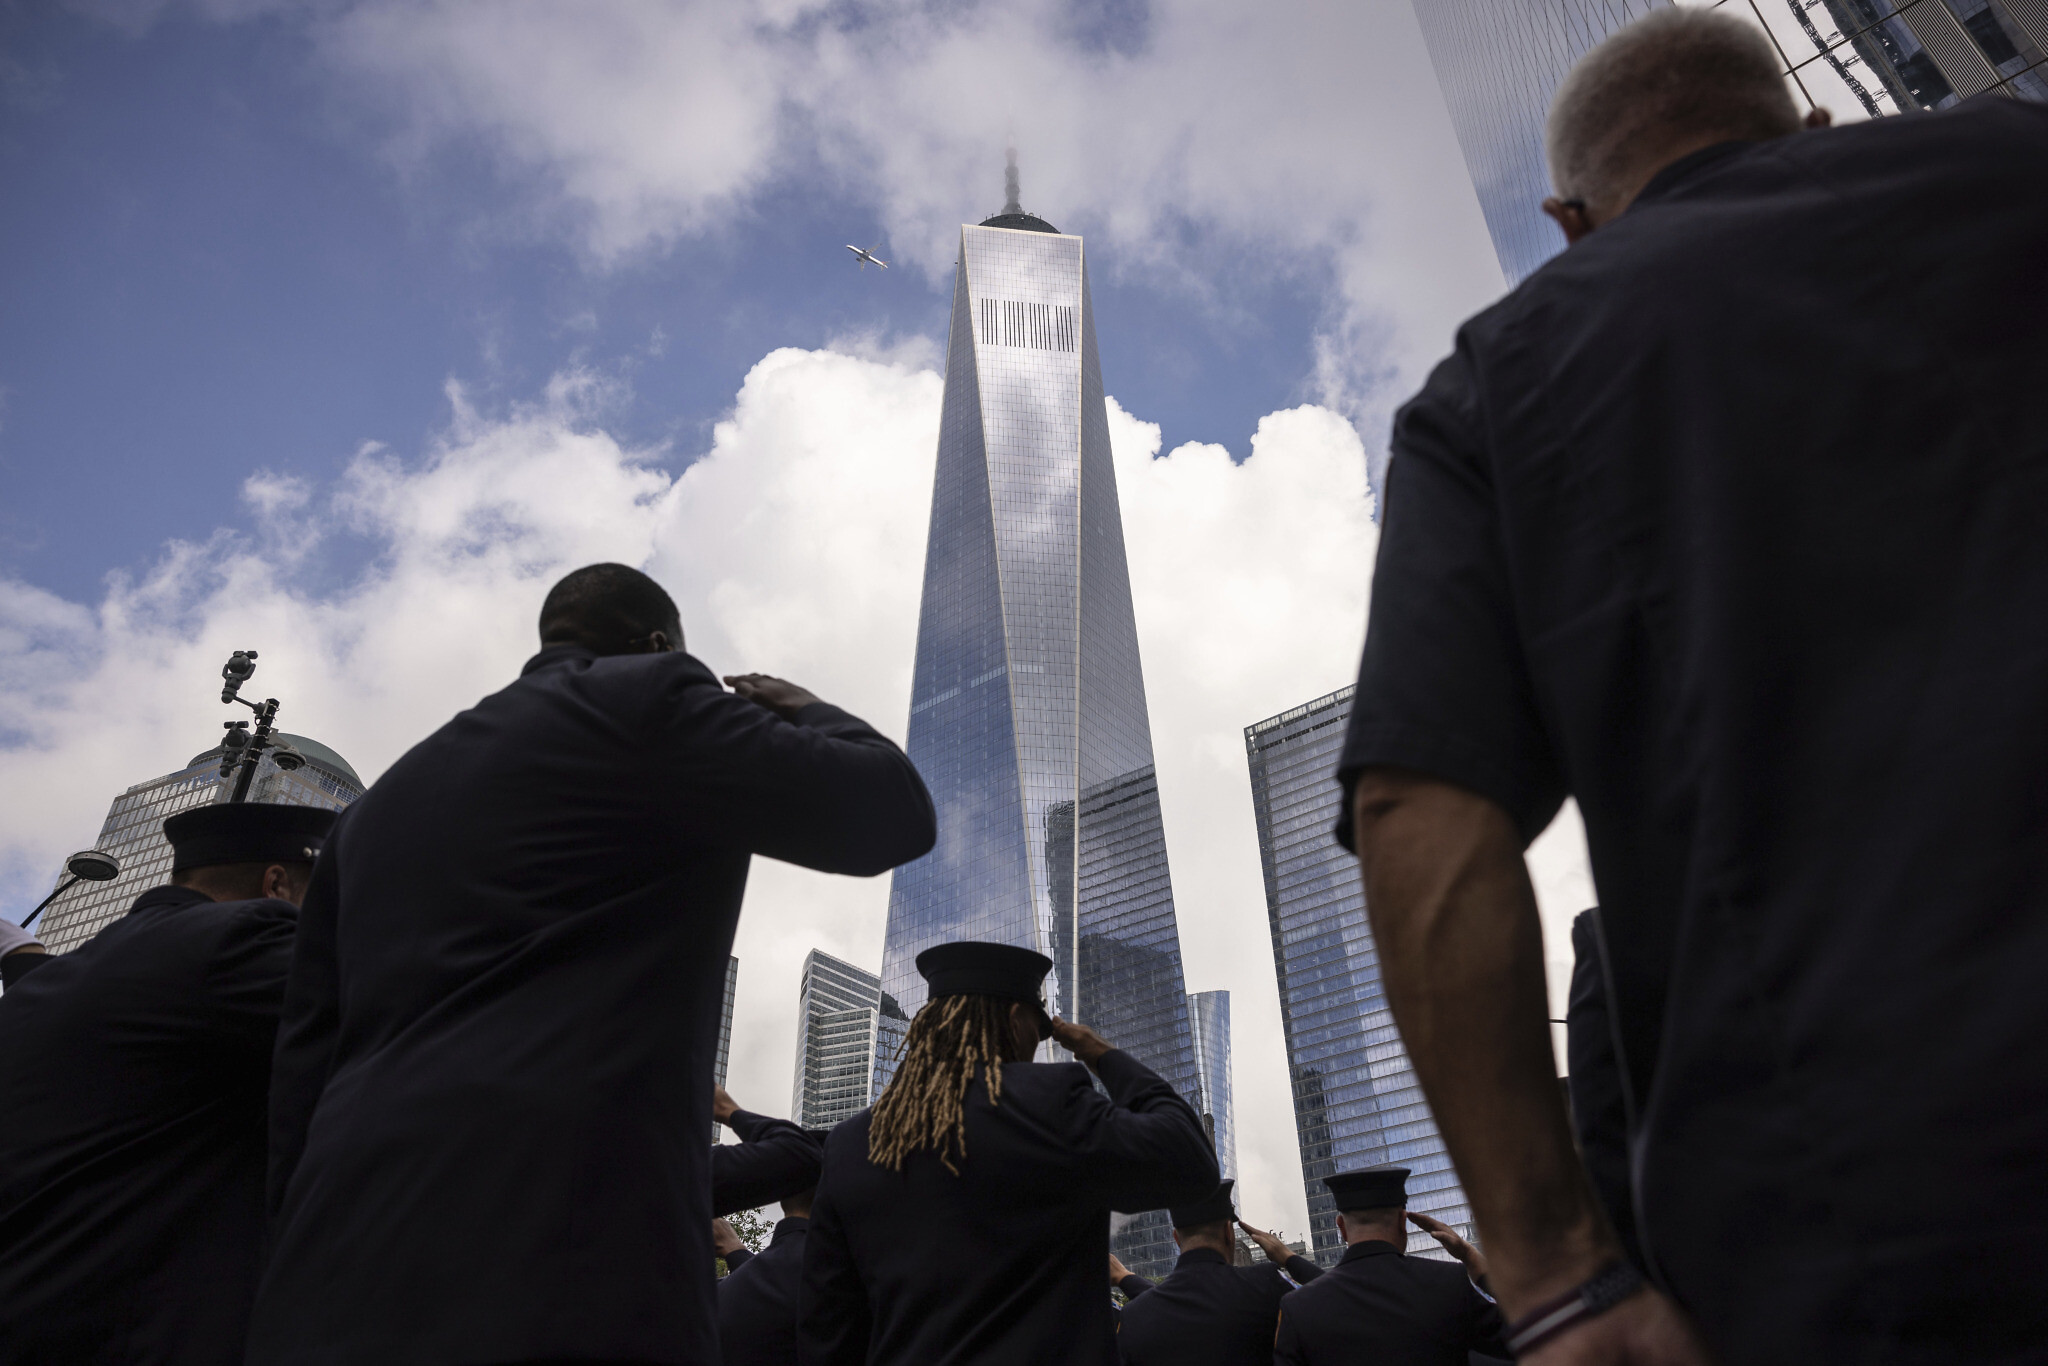 Everyone Was a New Yorker on September 11th